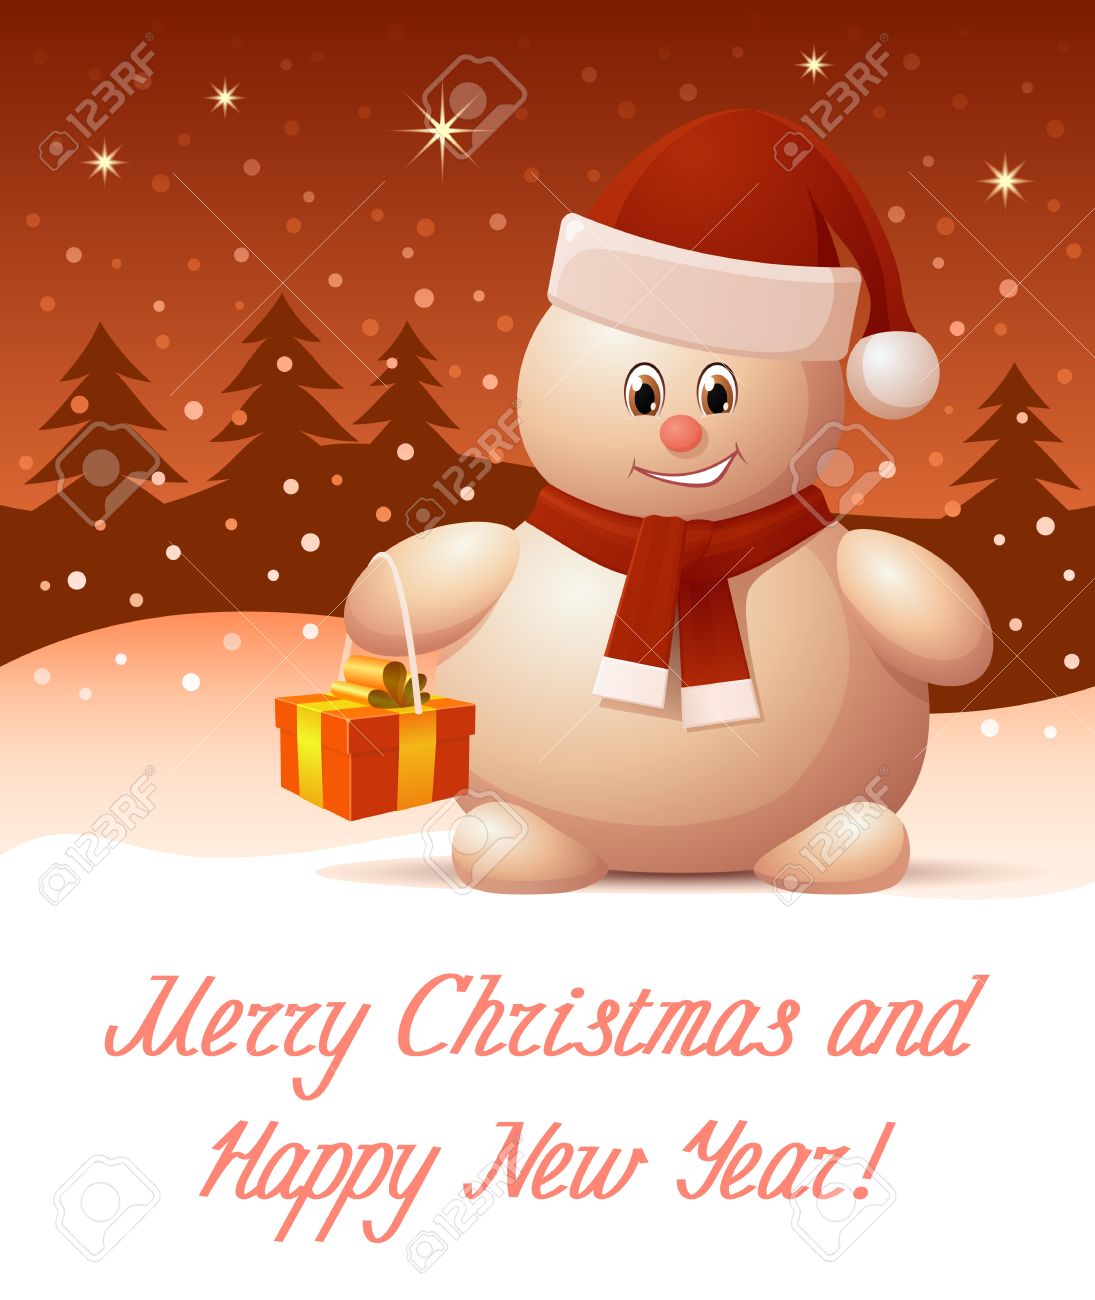 new year greeting card clipart - photo #32